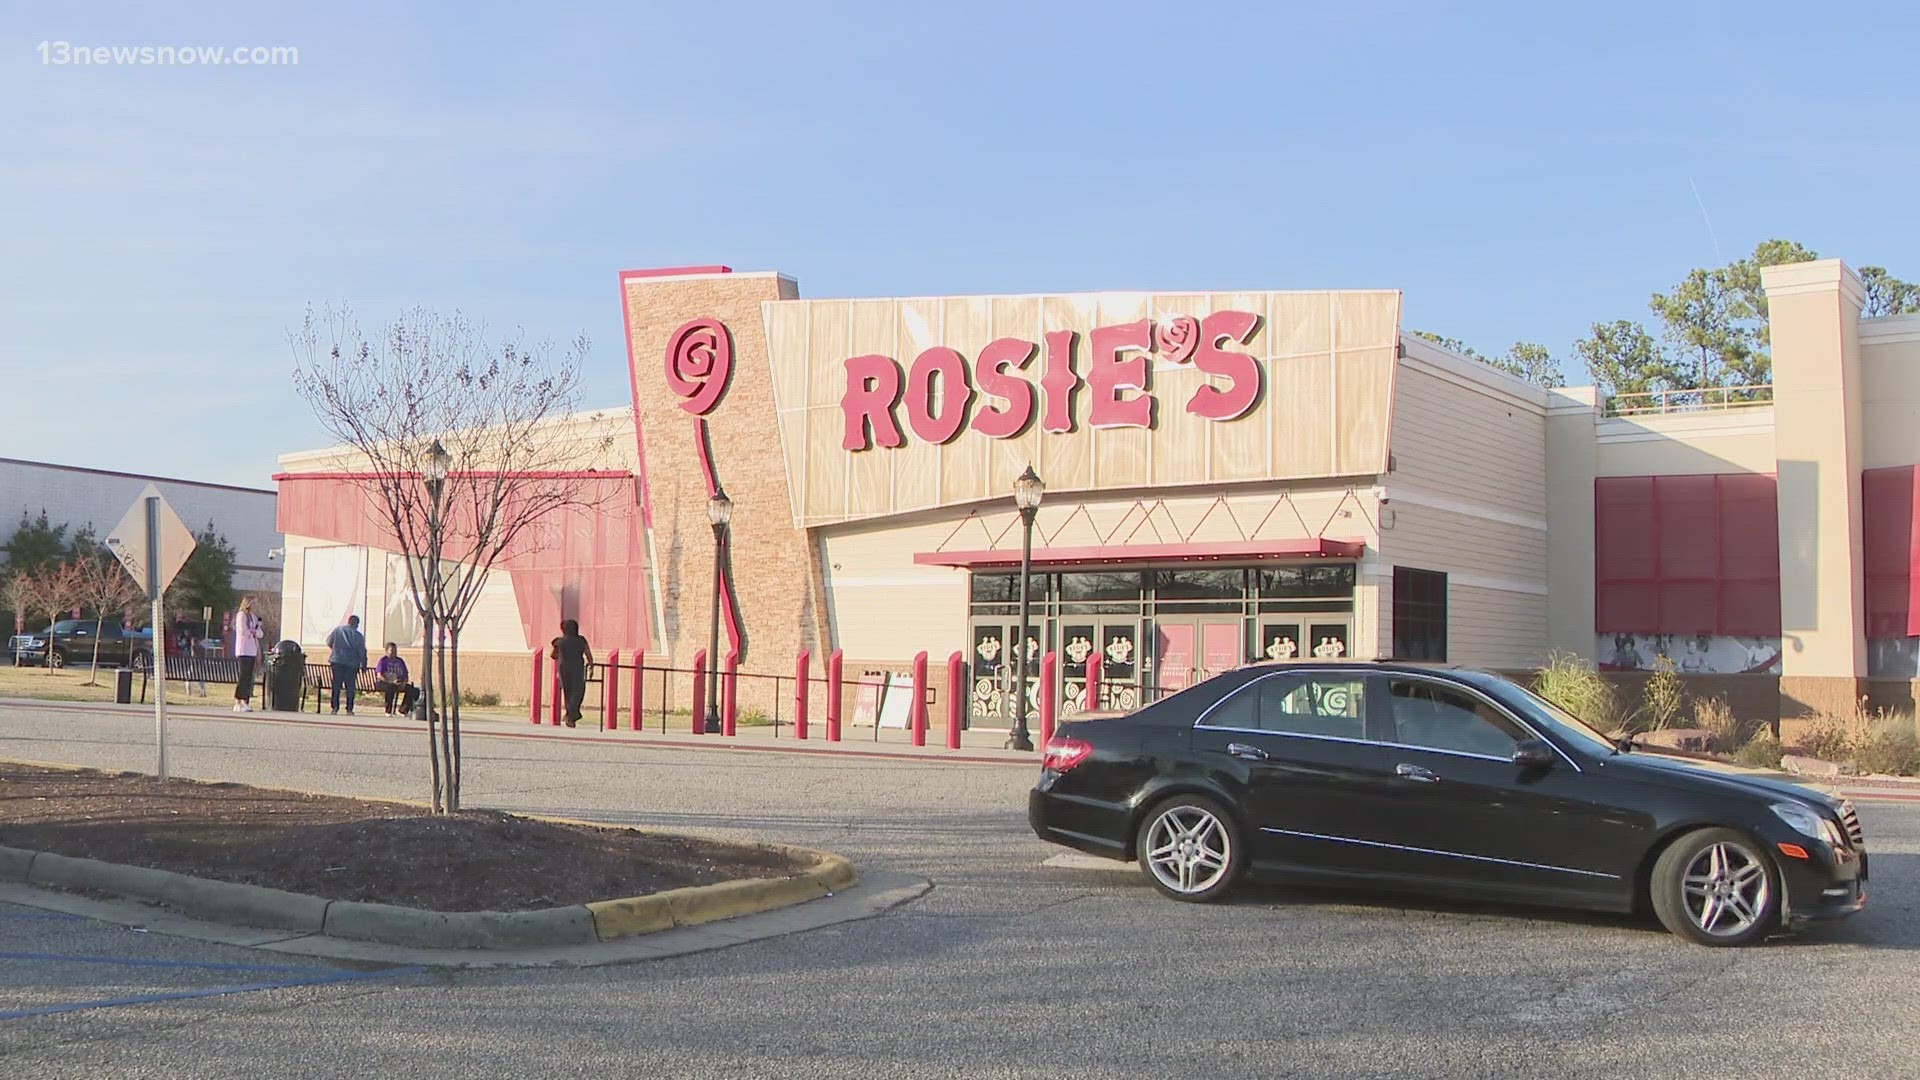 Hampton City Council members voted to allow Rosie’s to extend its operating hours to 24 hours a day.